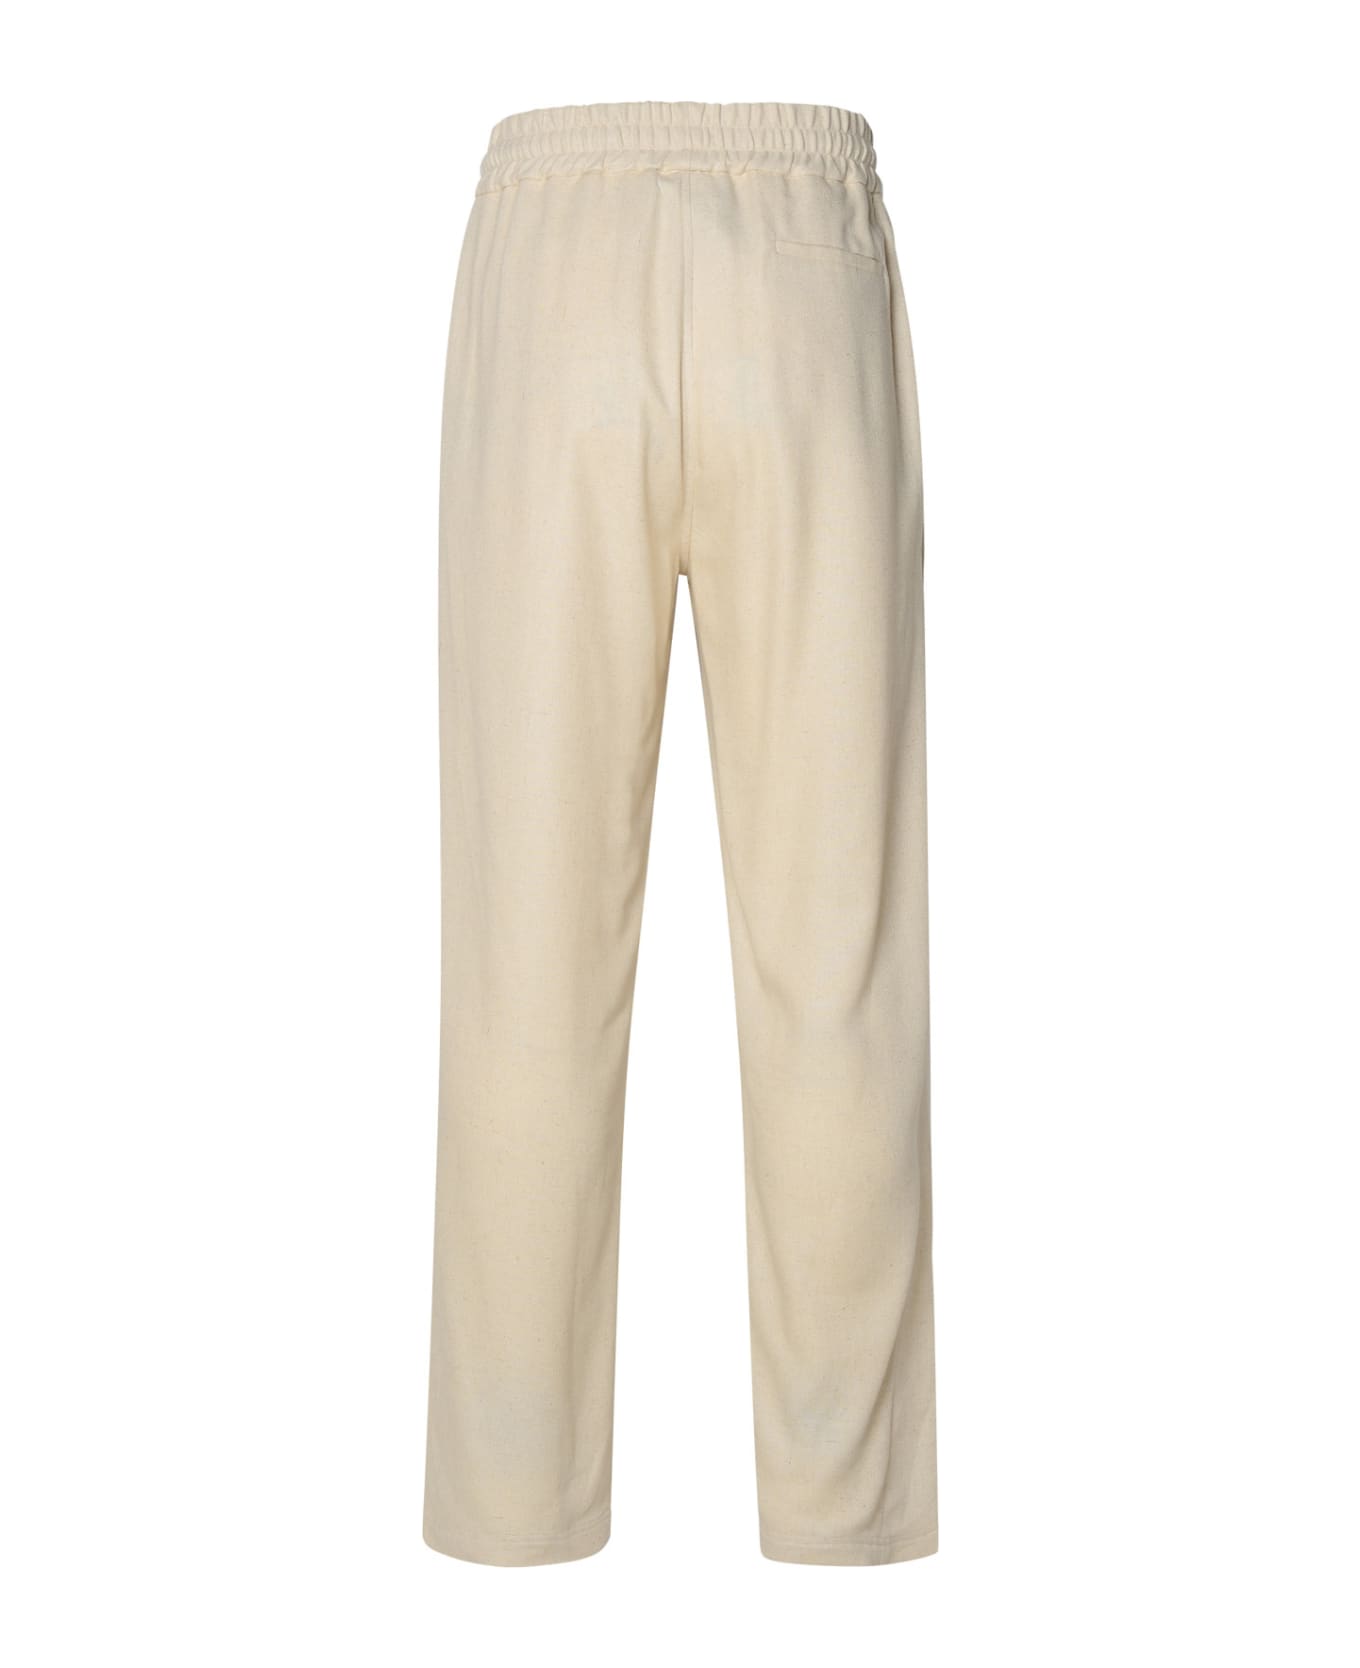 GCDS Ivory Linen Blend Trousers - Ivory ボトムス